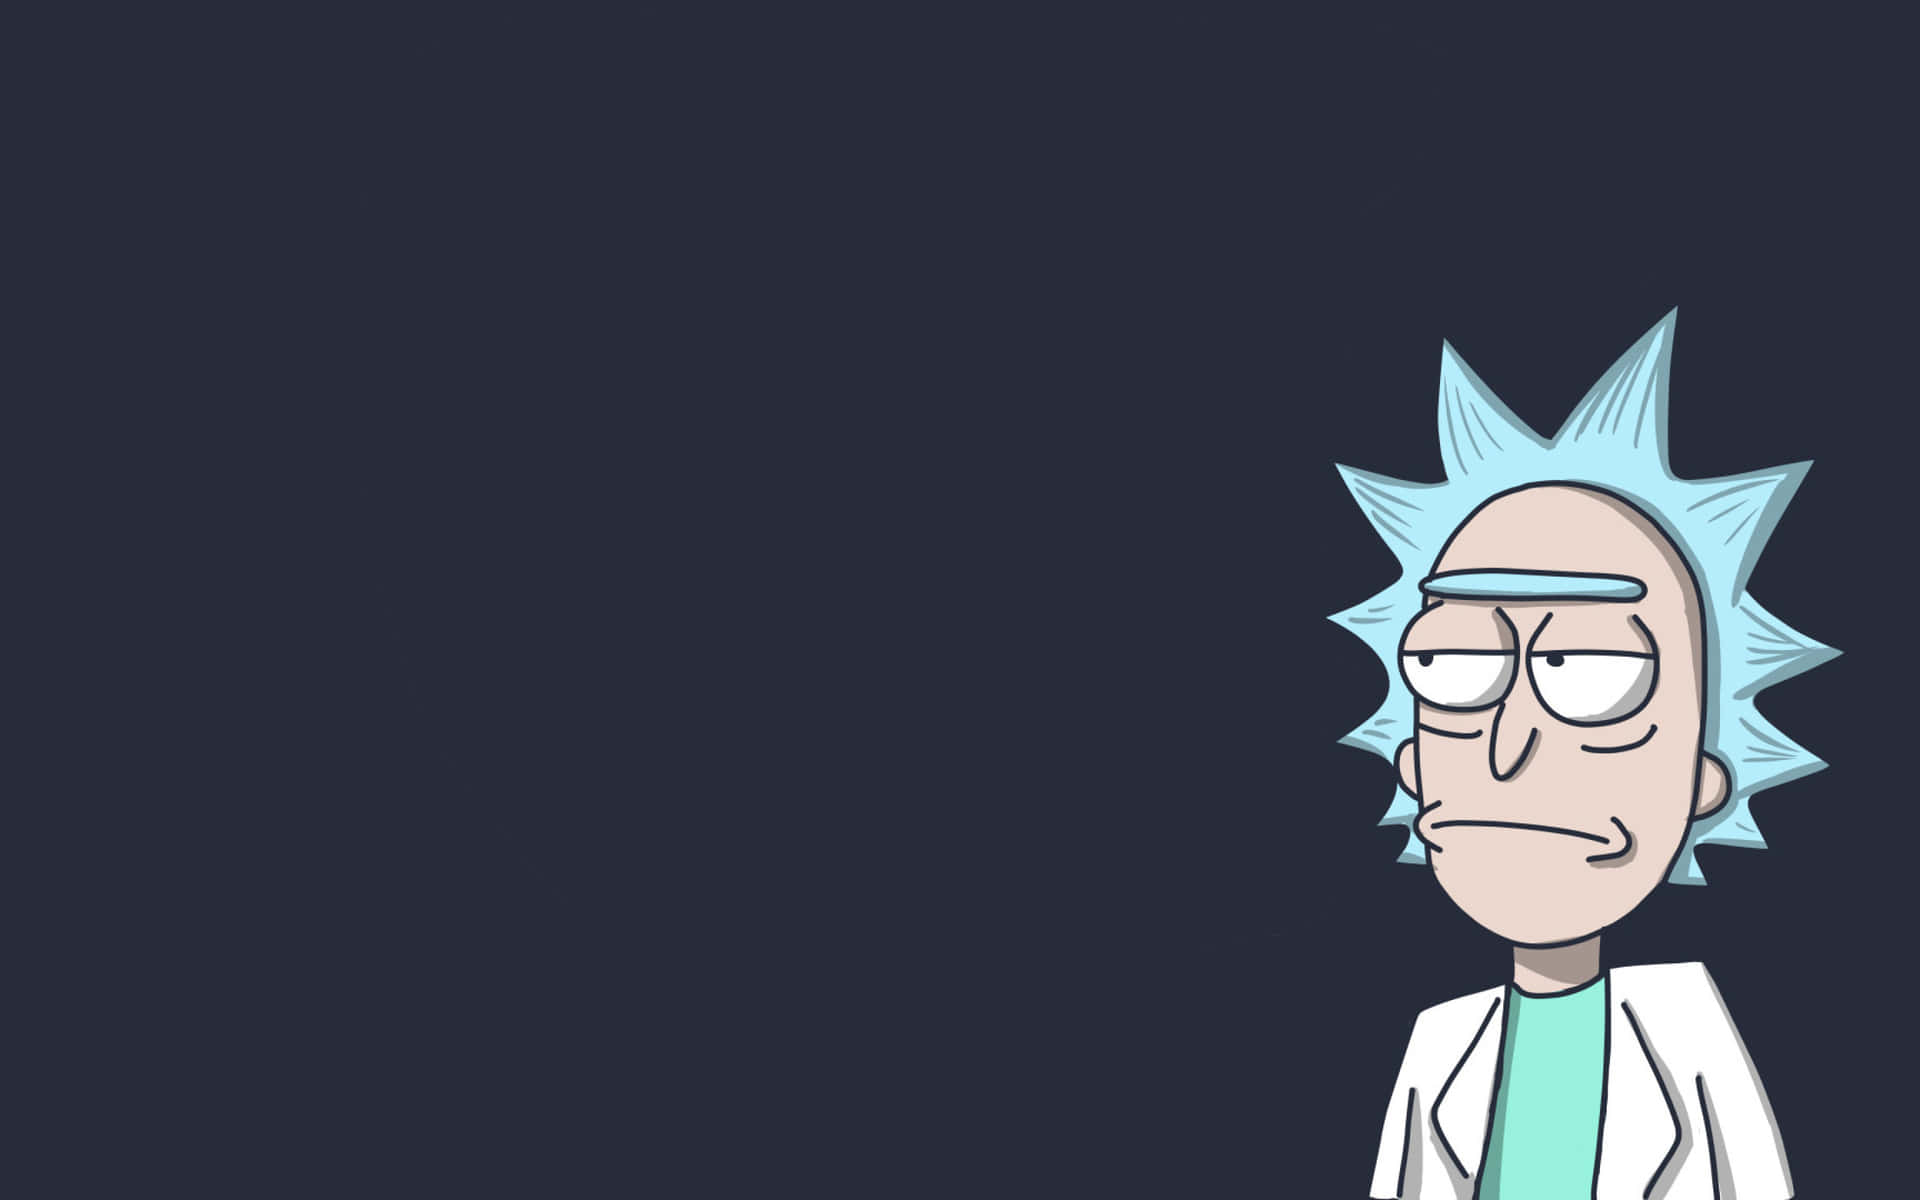 Enjoy the interdimensional adventures of Rick and Morty with your Macbook Wallpaper